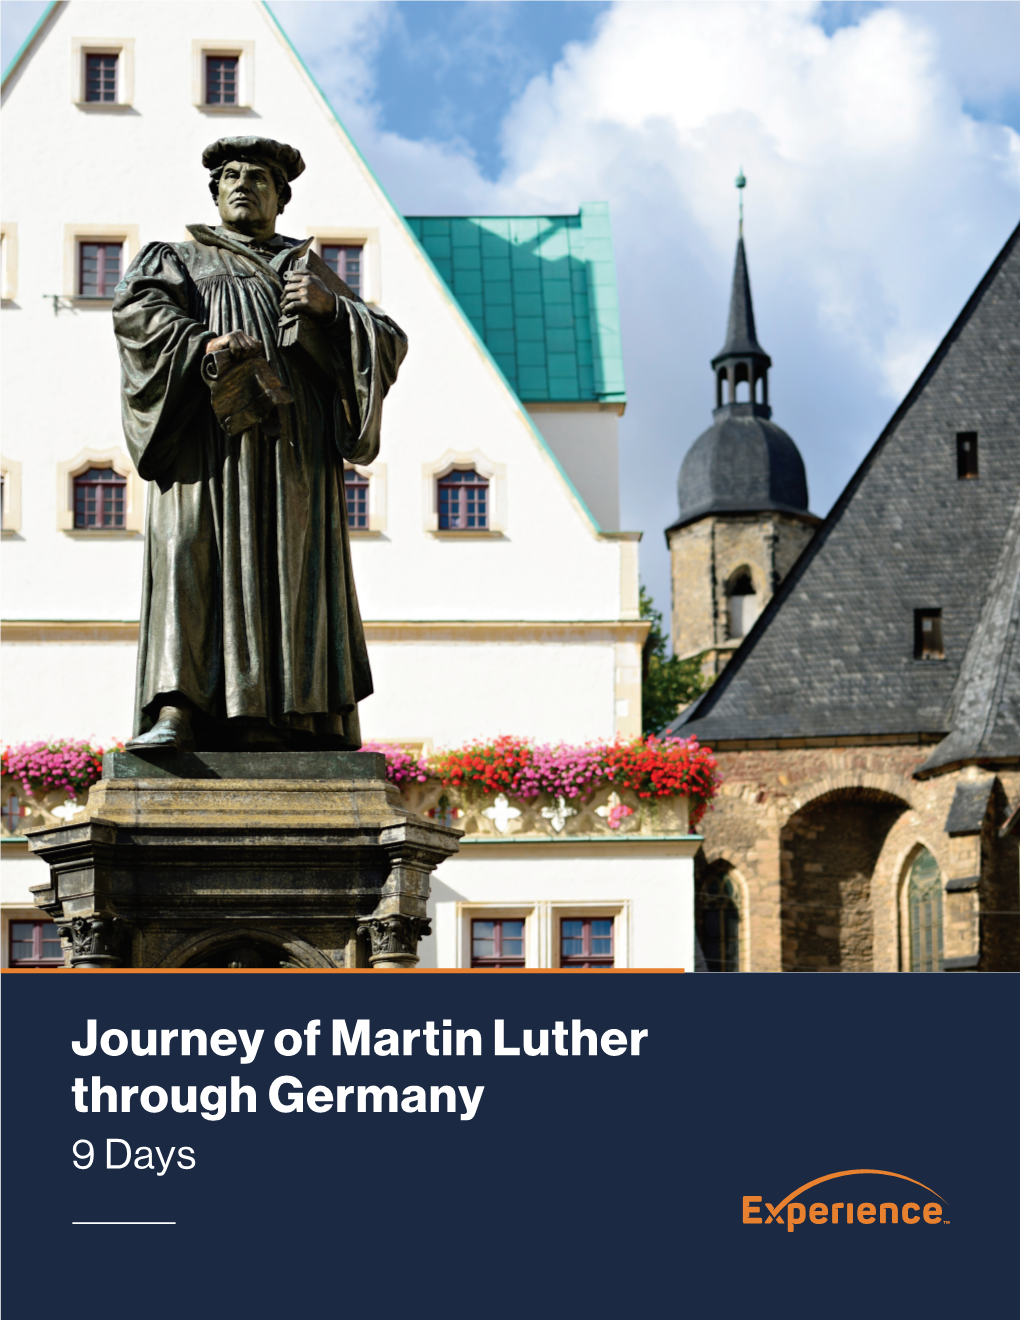 Journey of Martin Luther Through Germany 9 Days the Perfect Balance of Learning, Fun and Culture